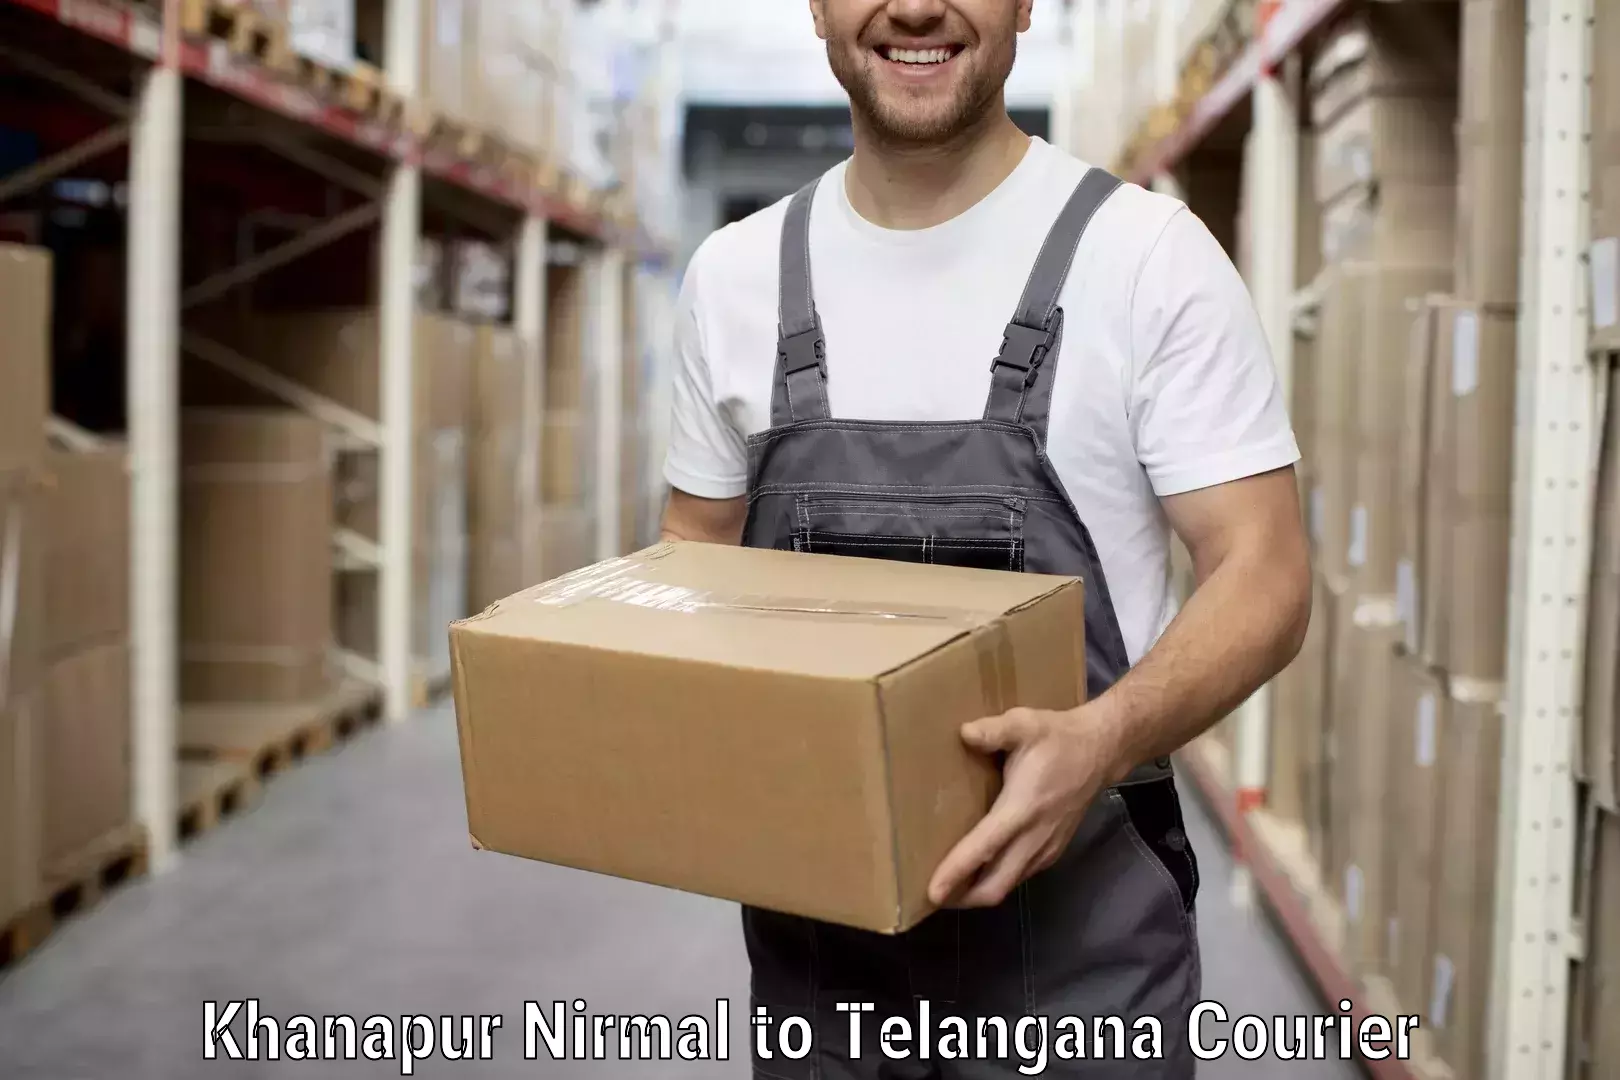 Professional movers and packers Khanapur Nirmal to Bejjanki